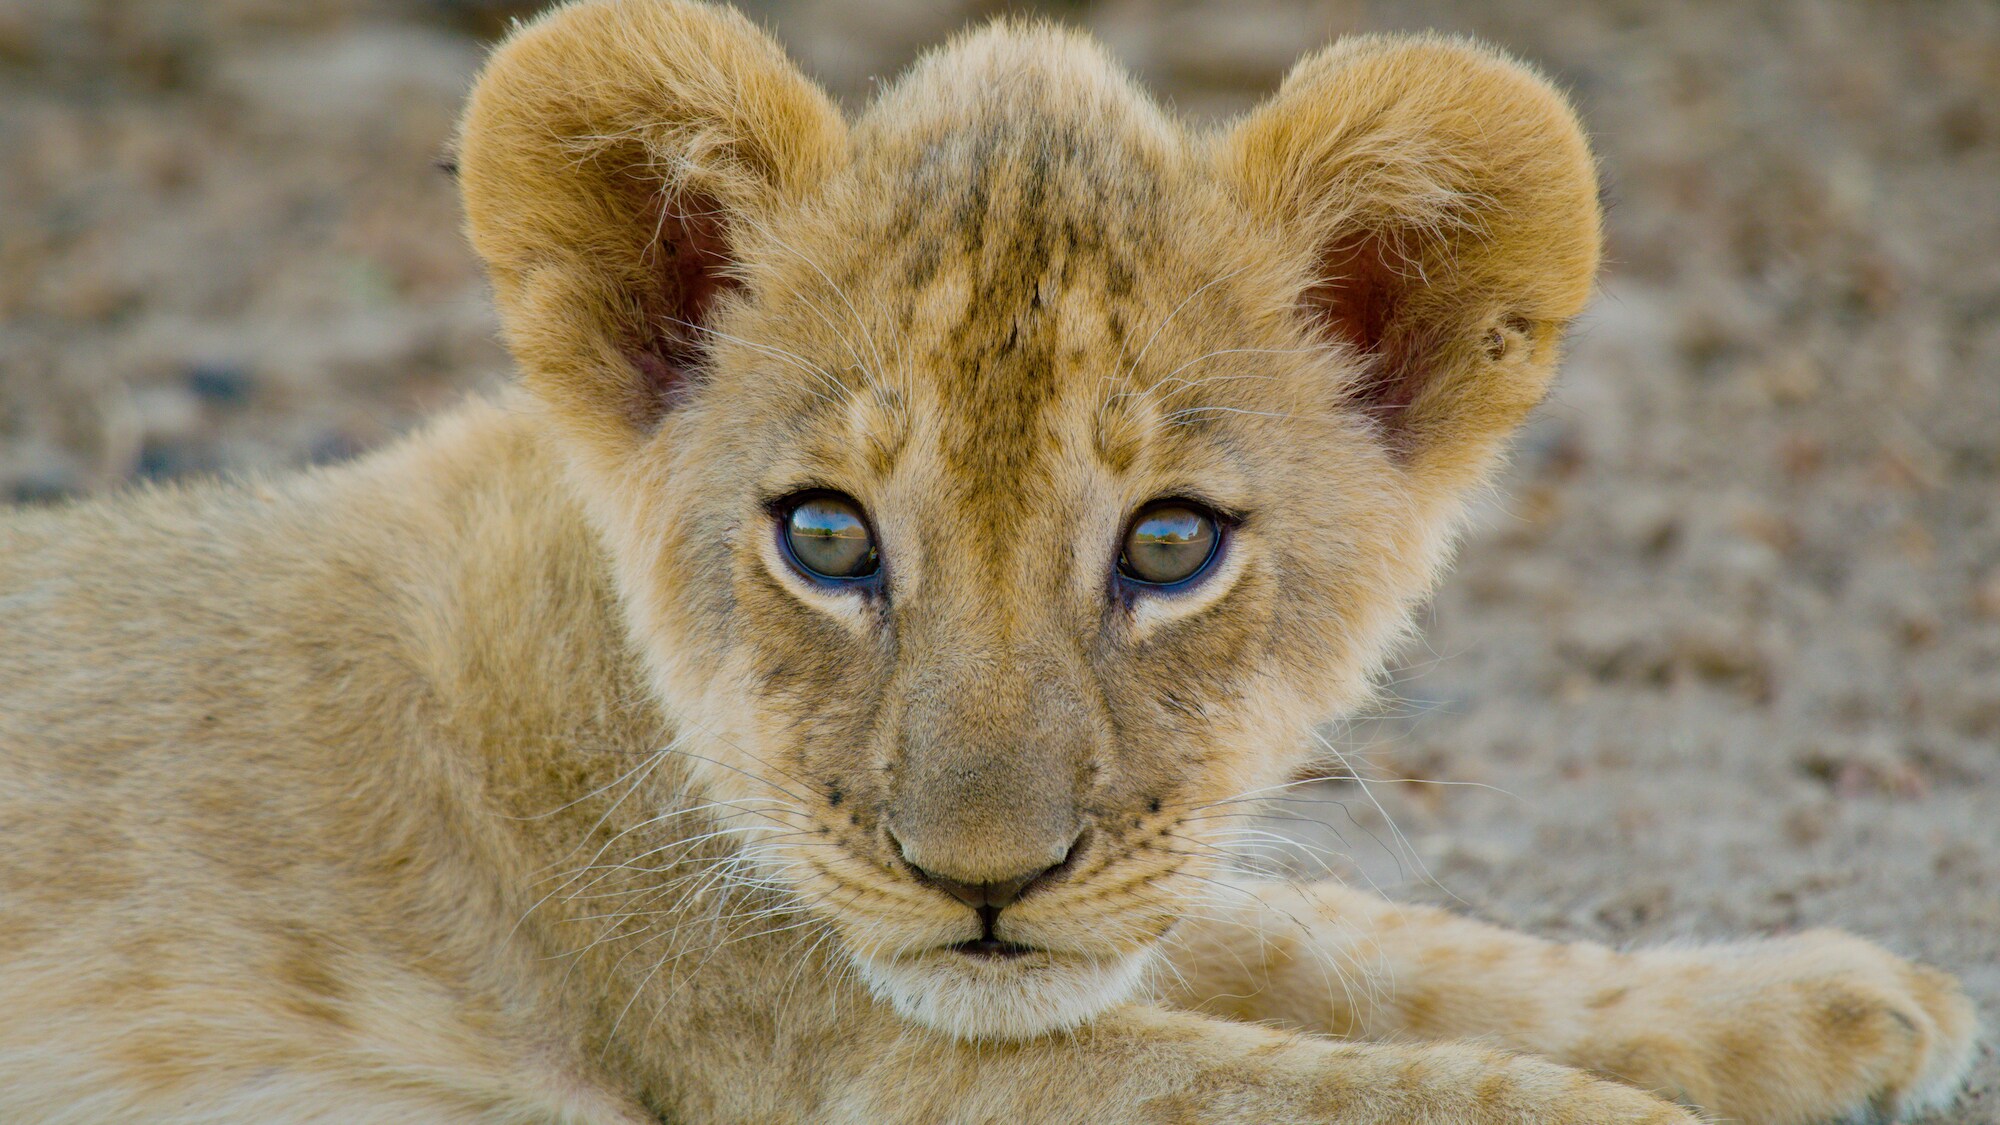 One of three cubs from the Mwamba pride in South Luangwa. Local guides estimate these cubs to be around 3 months old. (Credit: National Geographic for Disney+)